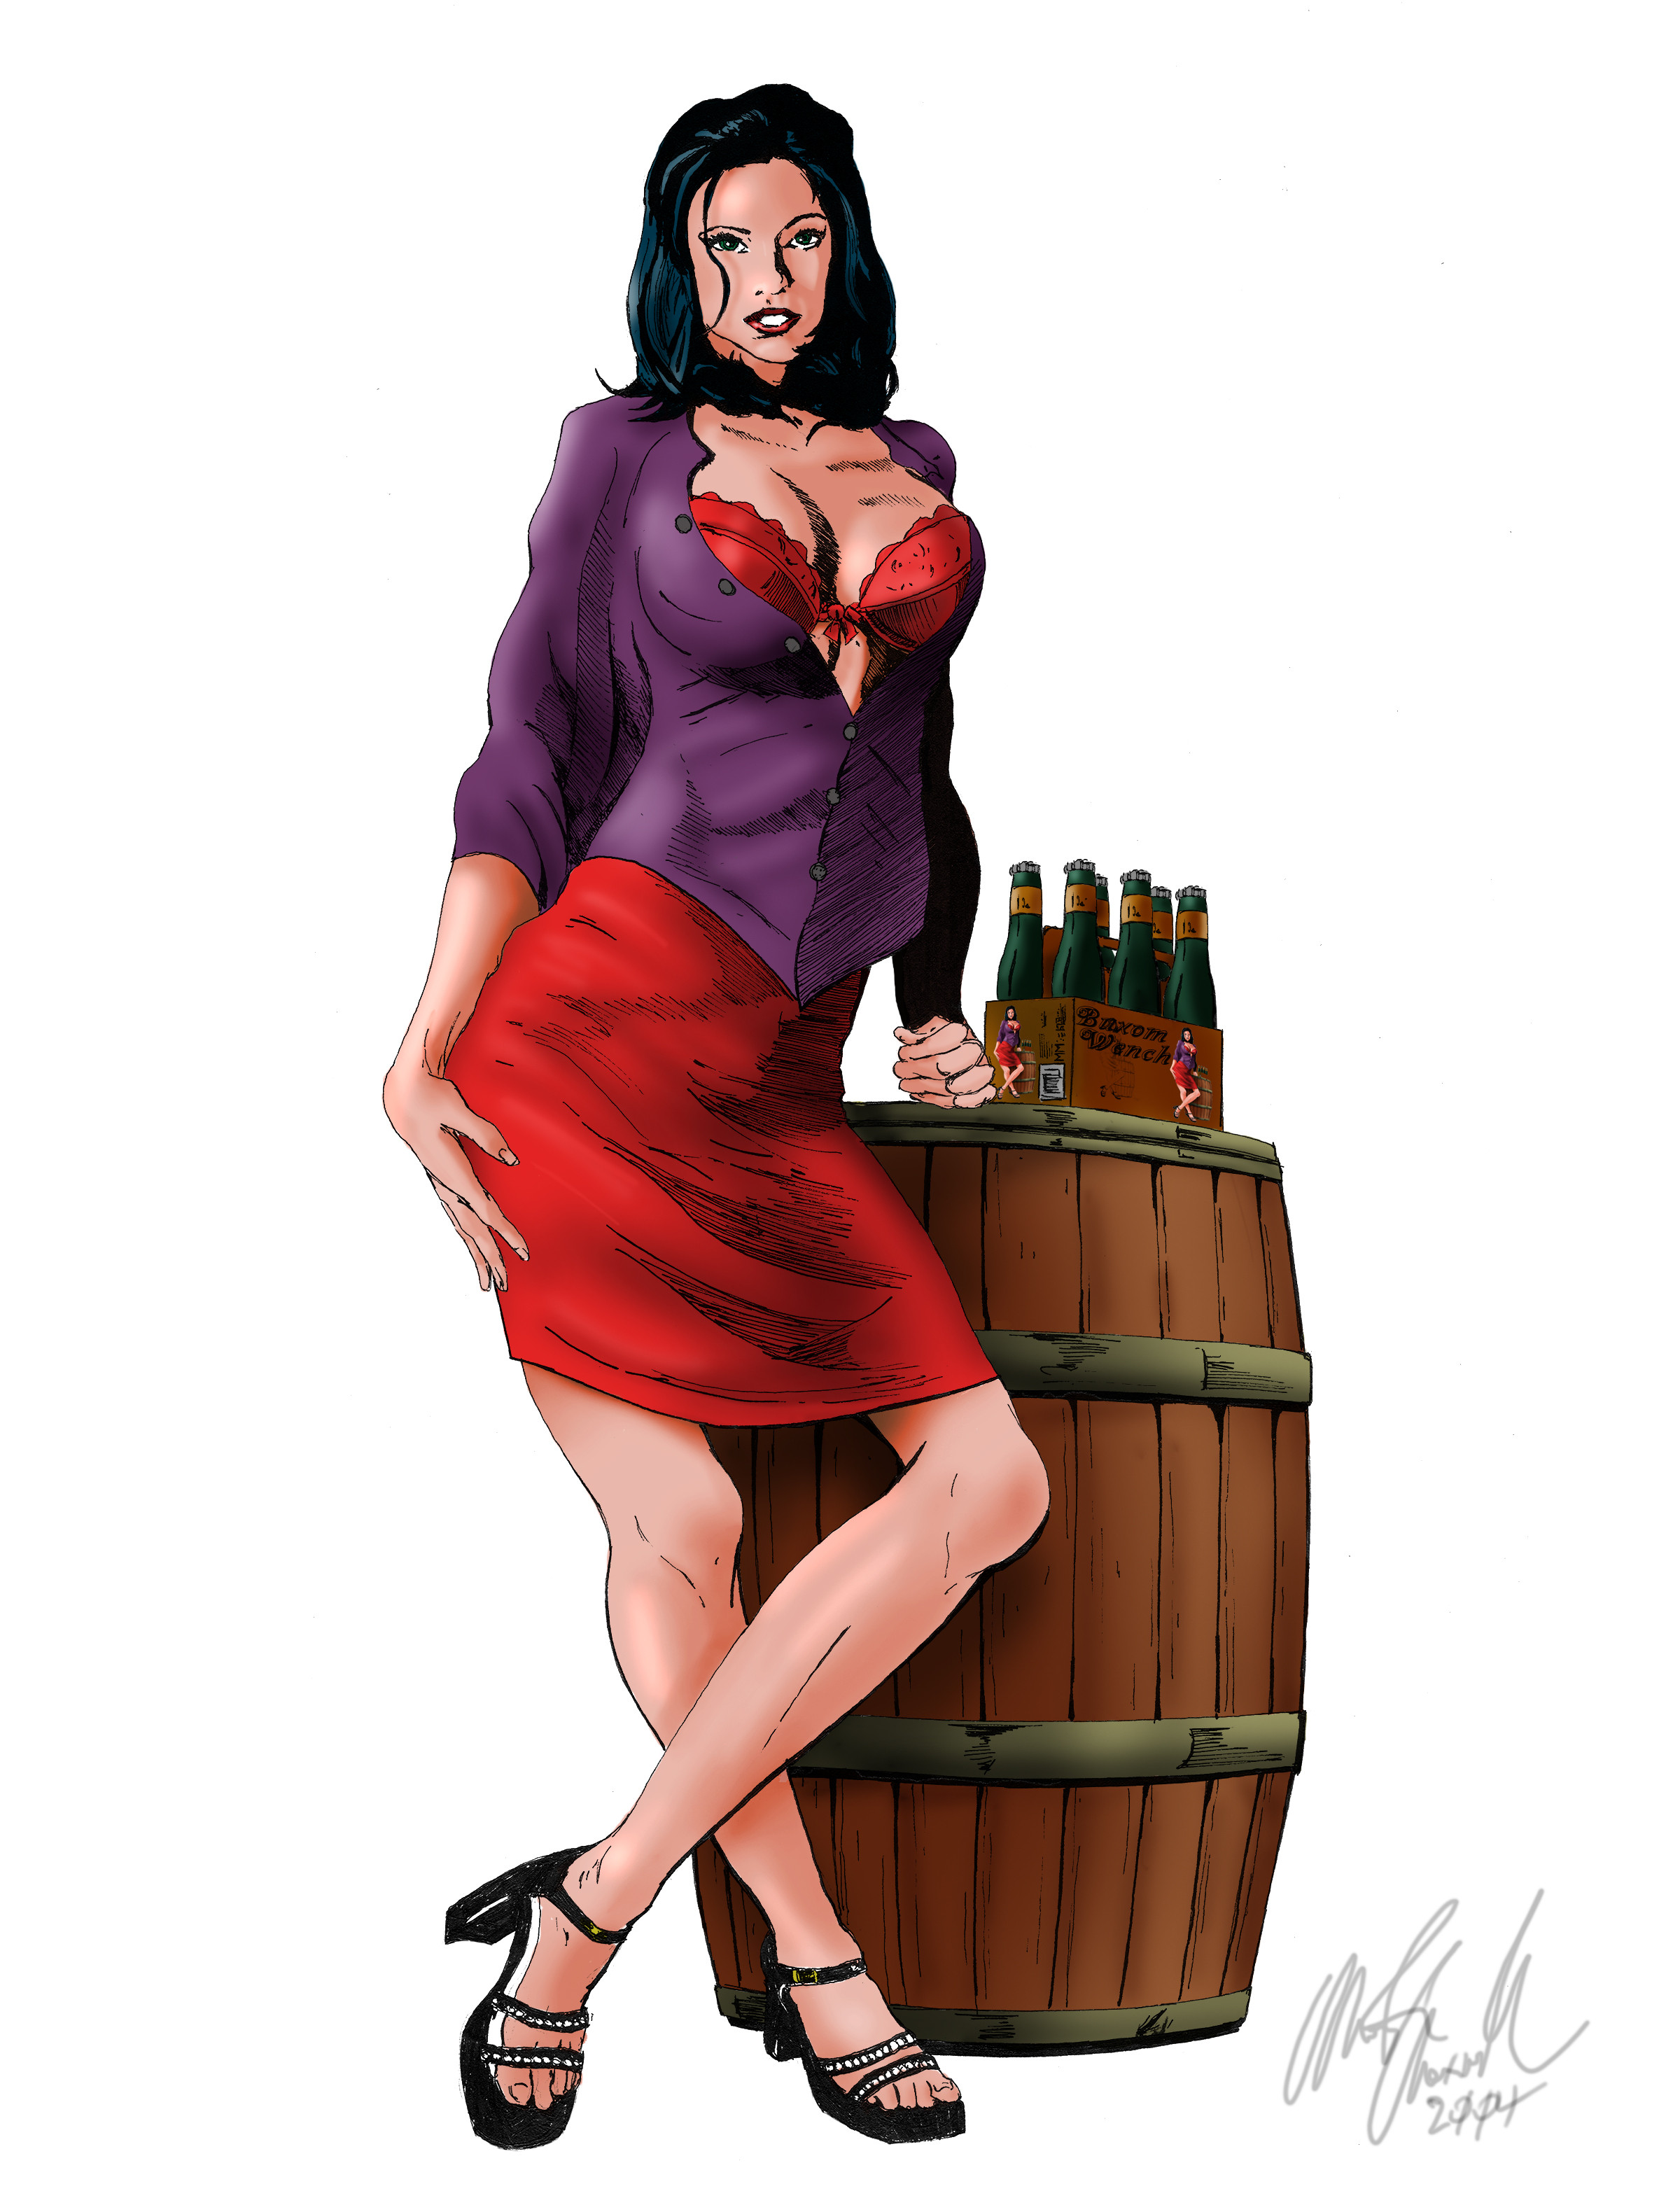 Commissioned work, 8' x 10" pen and ink drawing colored in Photoshop. Used as a logo for a custom brewed beer. 